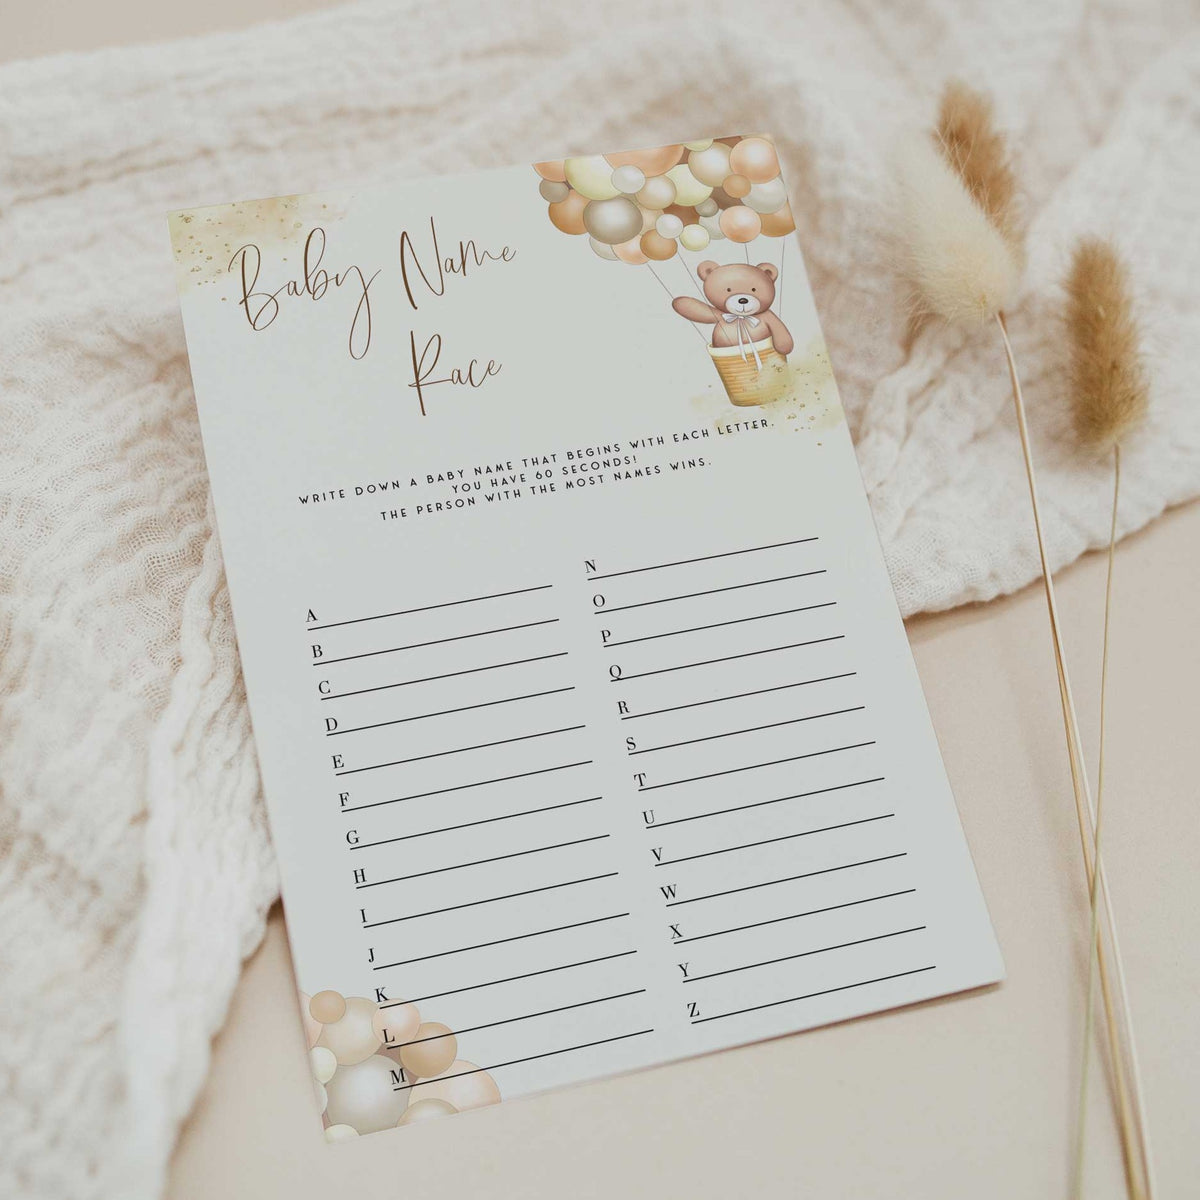 Fully editable and printable baby shower baby name race game with a hot air balloon teddy bear, we can bearly wait design. Perfect for a We Can Bearly Wait baby shower themed party